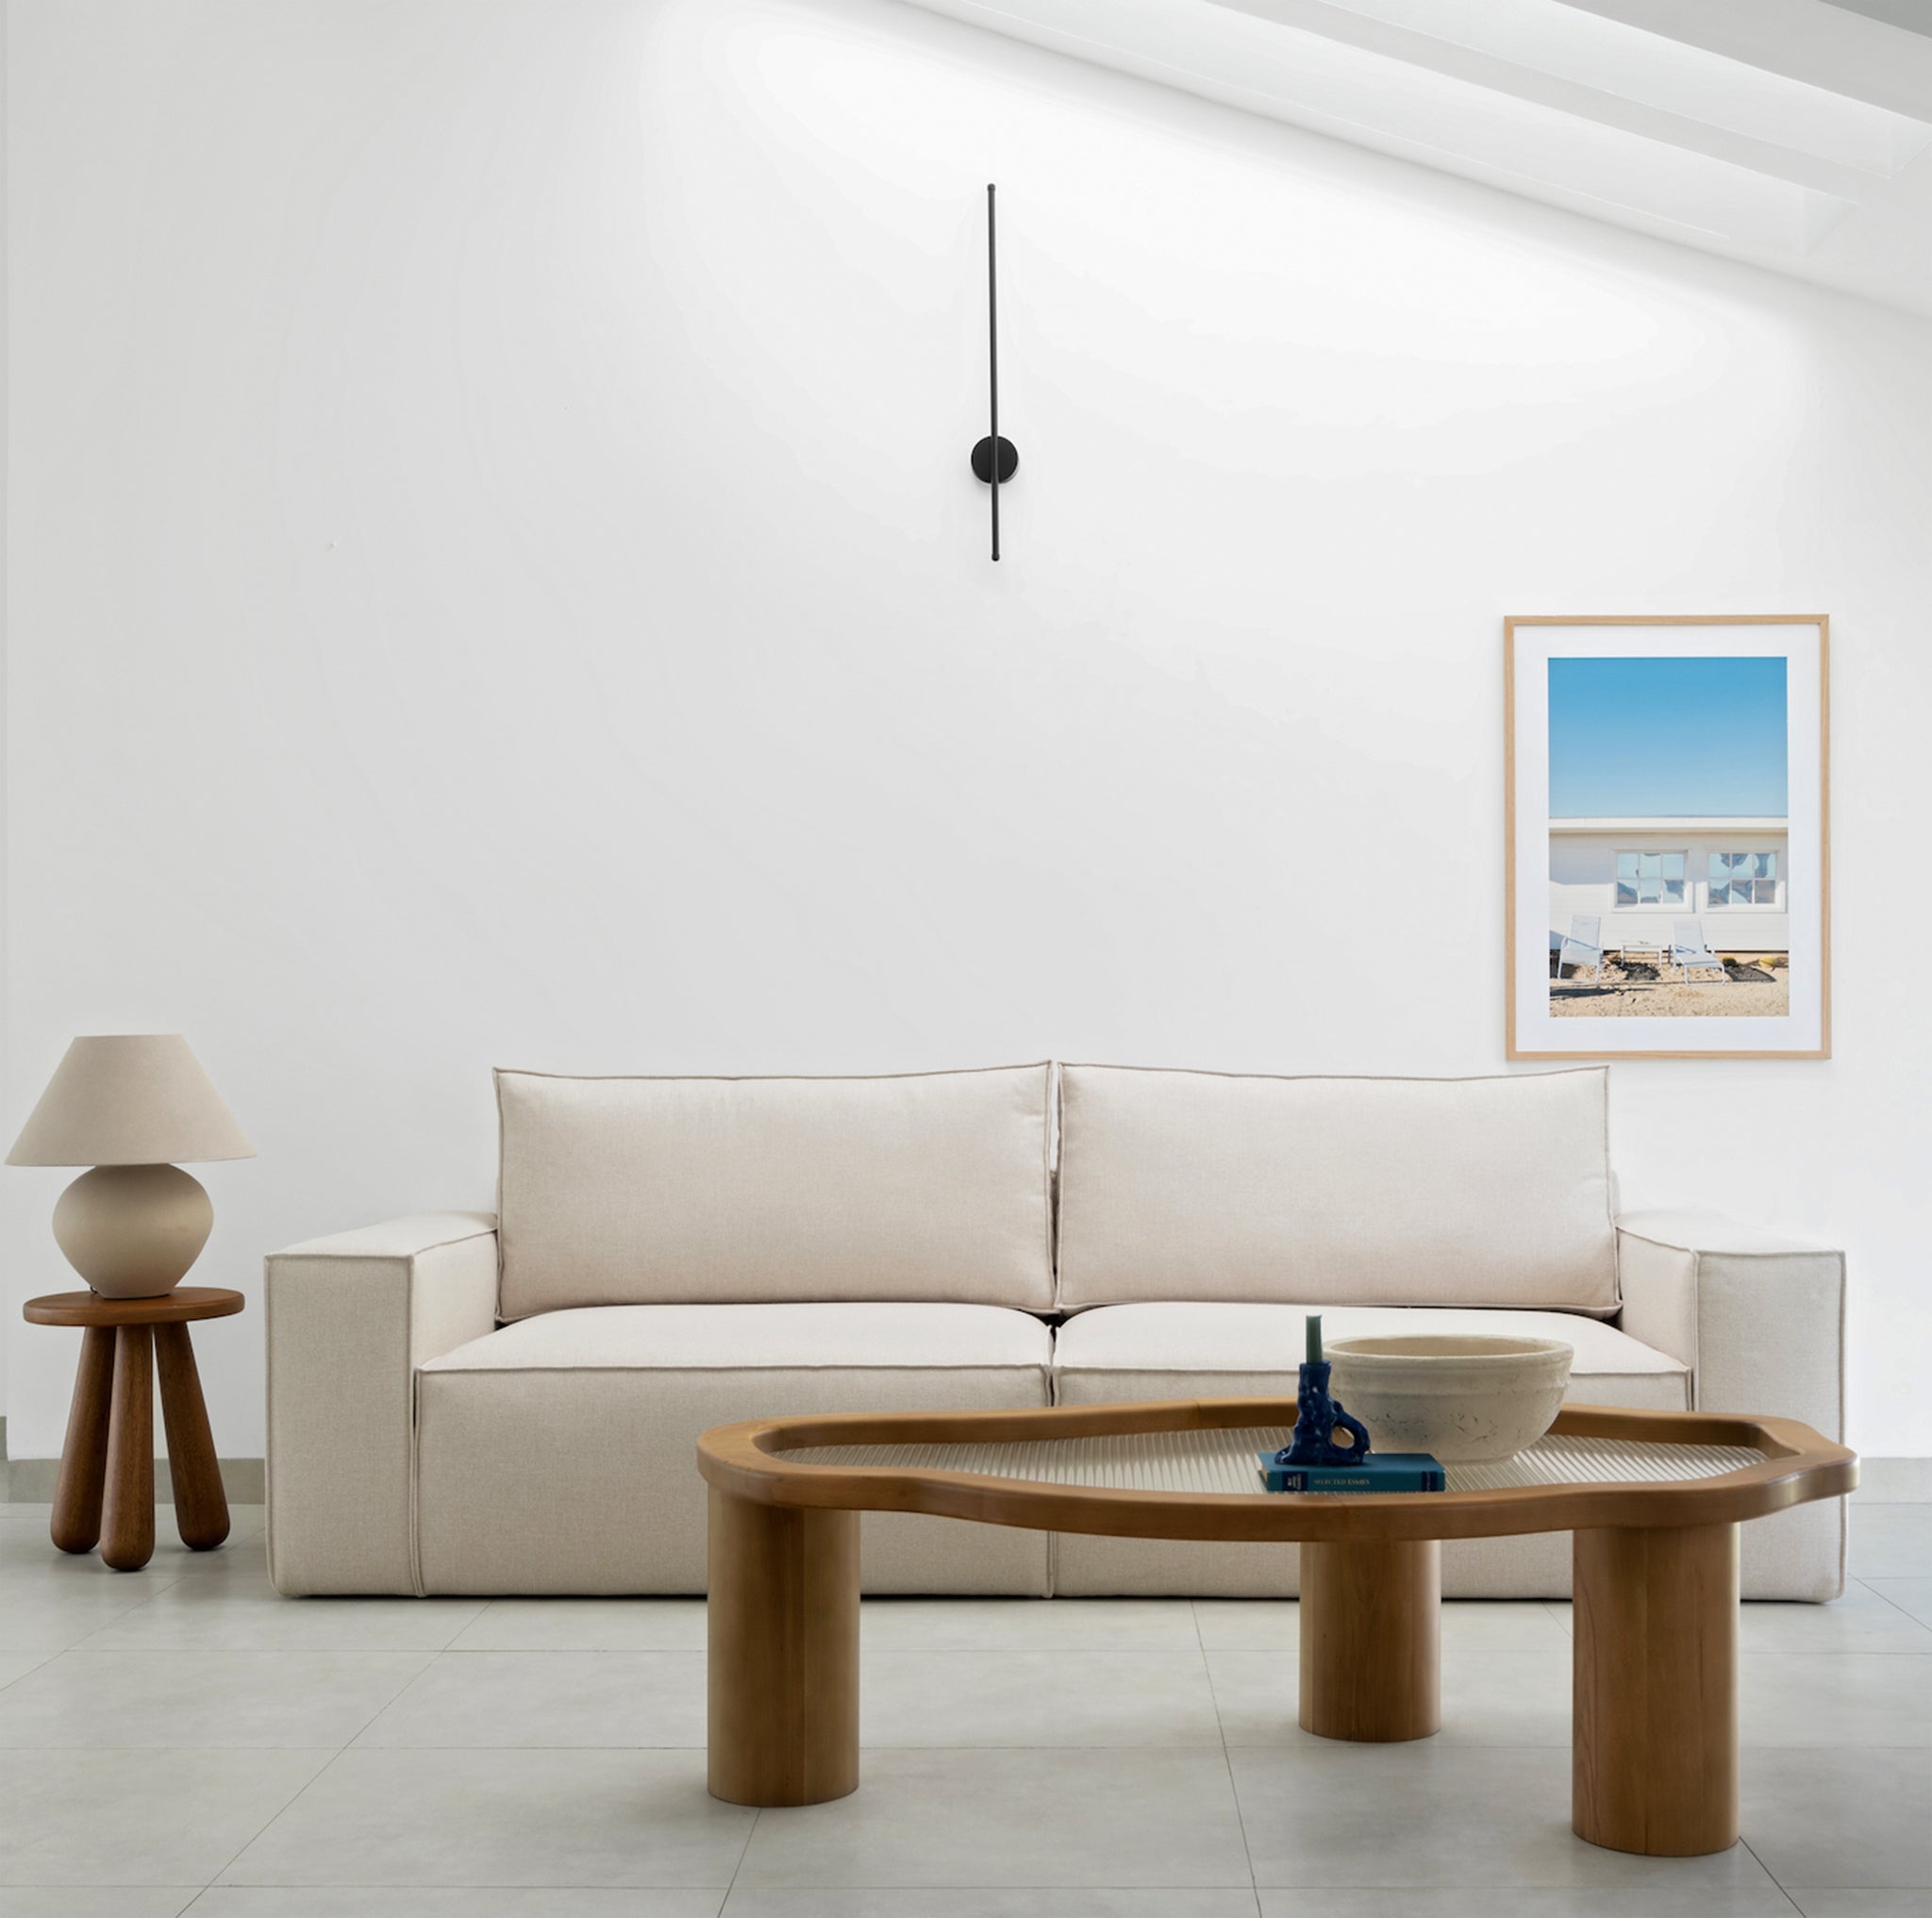 Light and airy living space featuring a comfortable white L-shaped couch, relaxing brown leather ottoman, and a sleek table lamp for a touch of modern design.